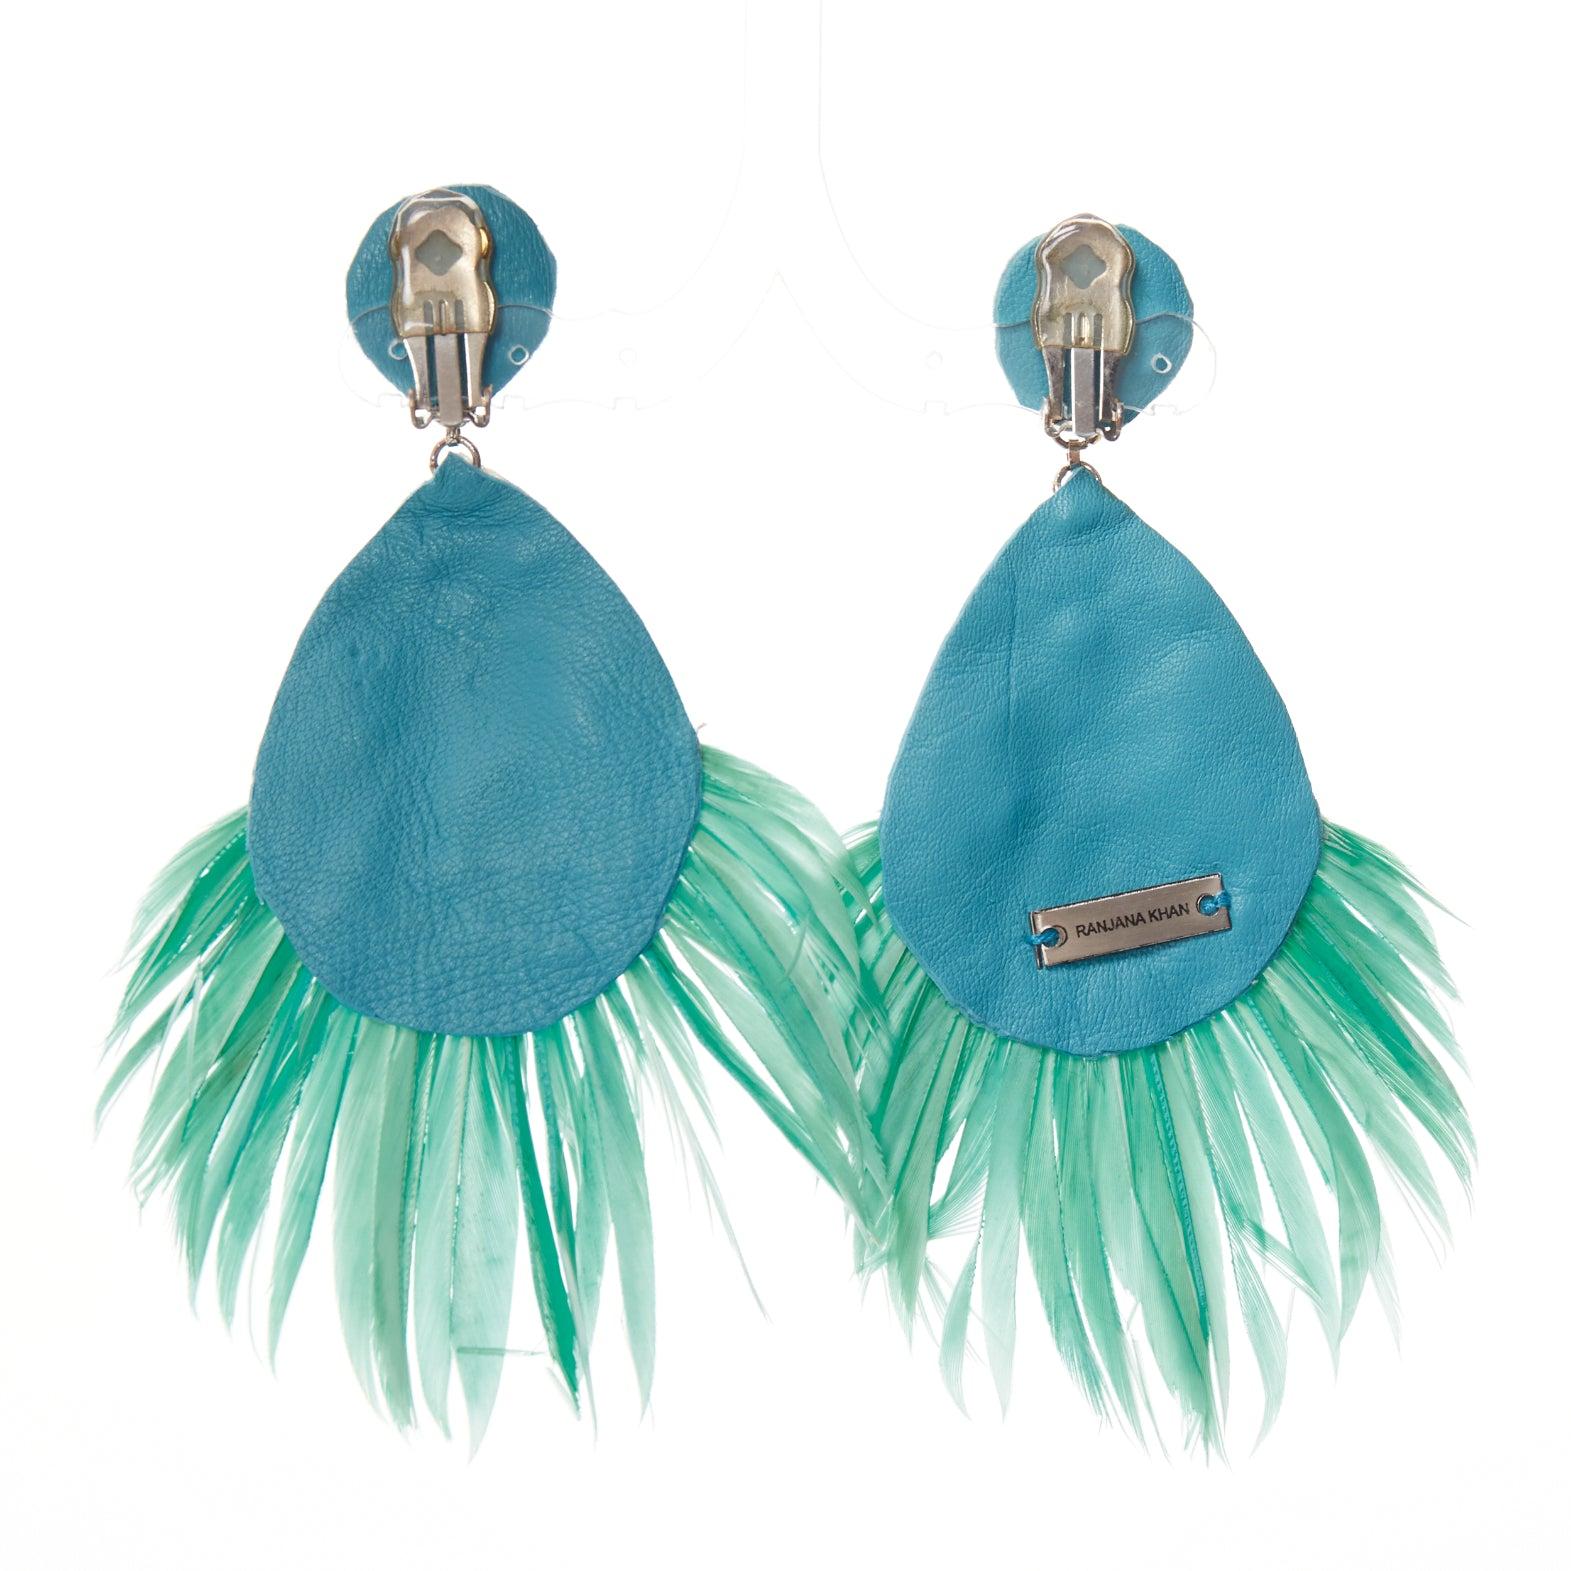 RANJANA KHAN teal green feather beads big dangling clip on earrings For Sale 1